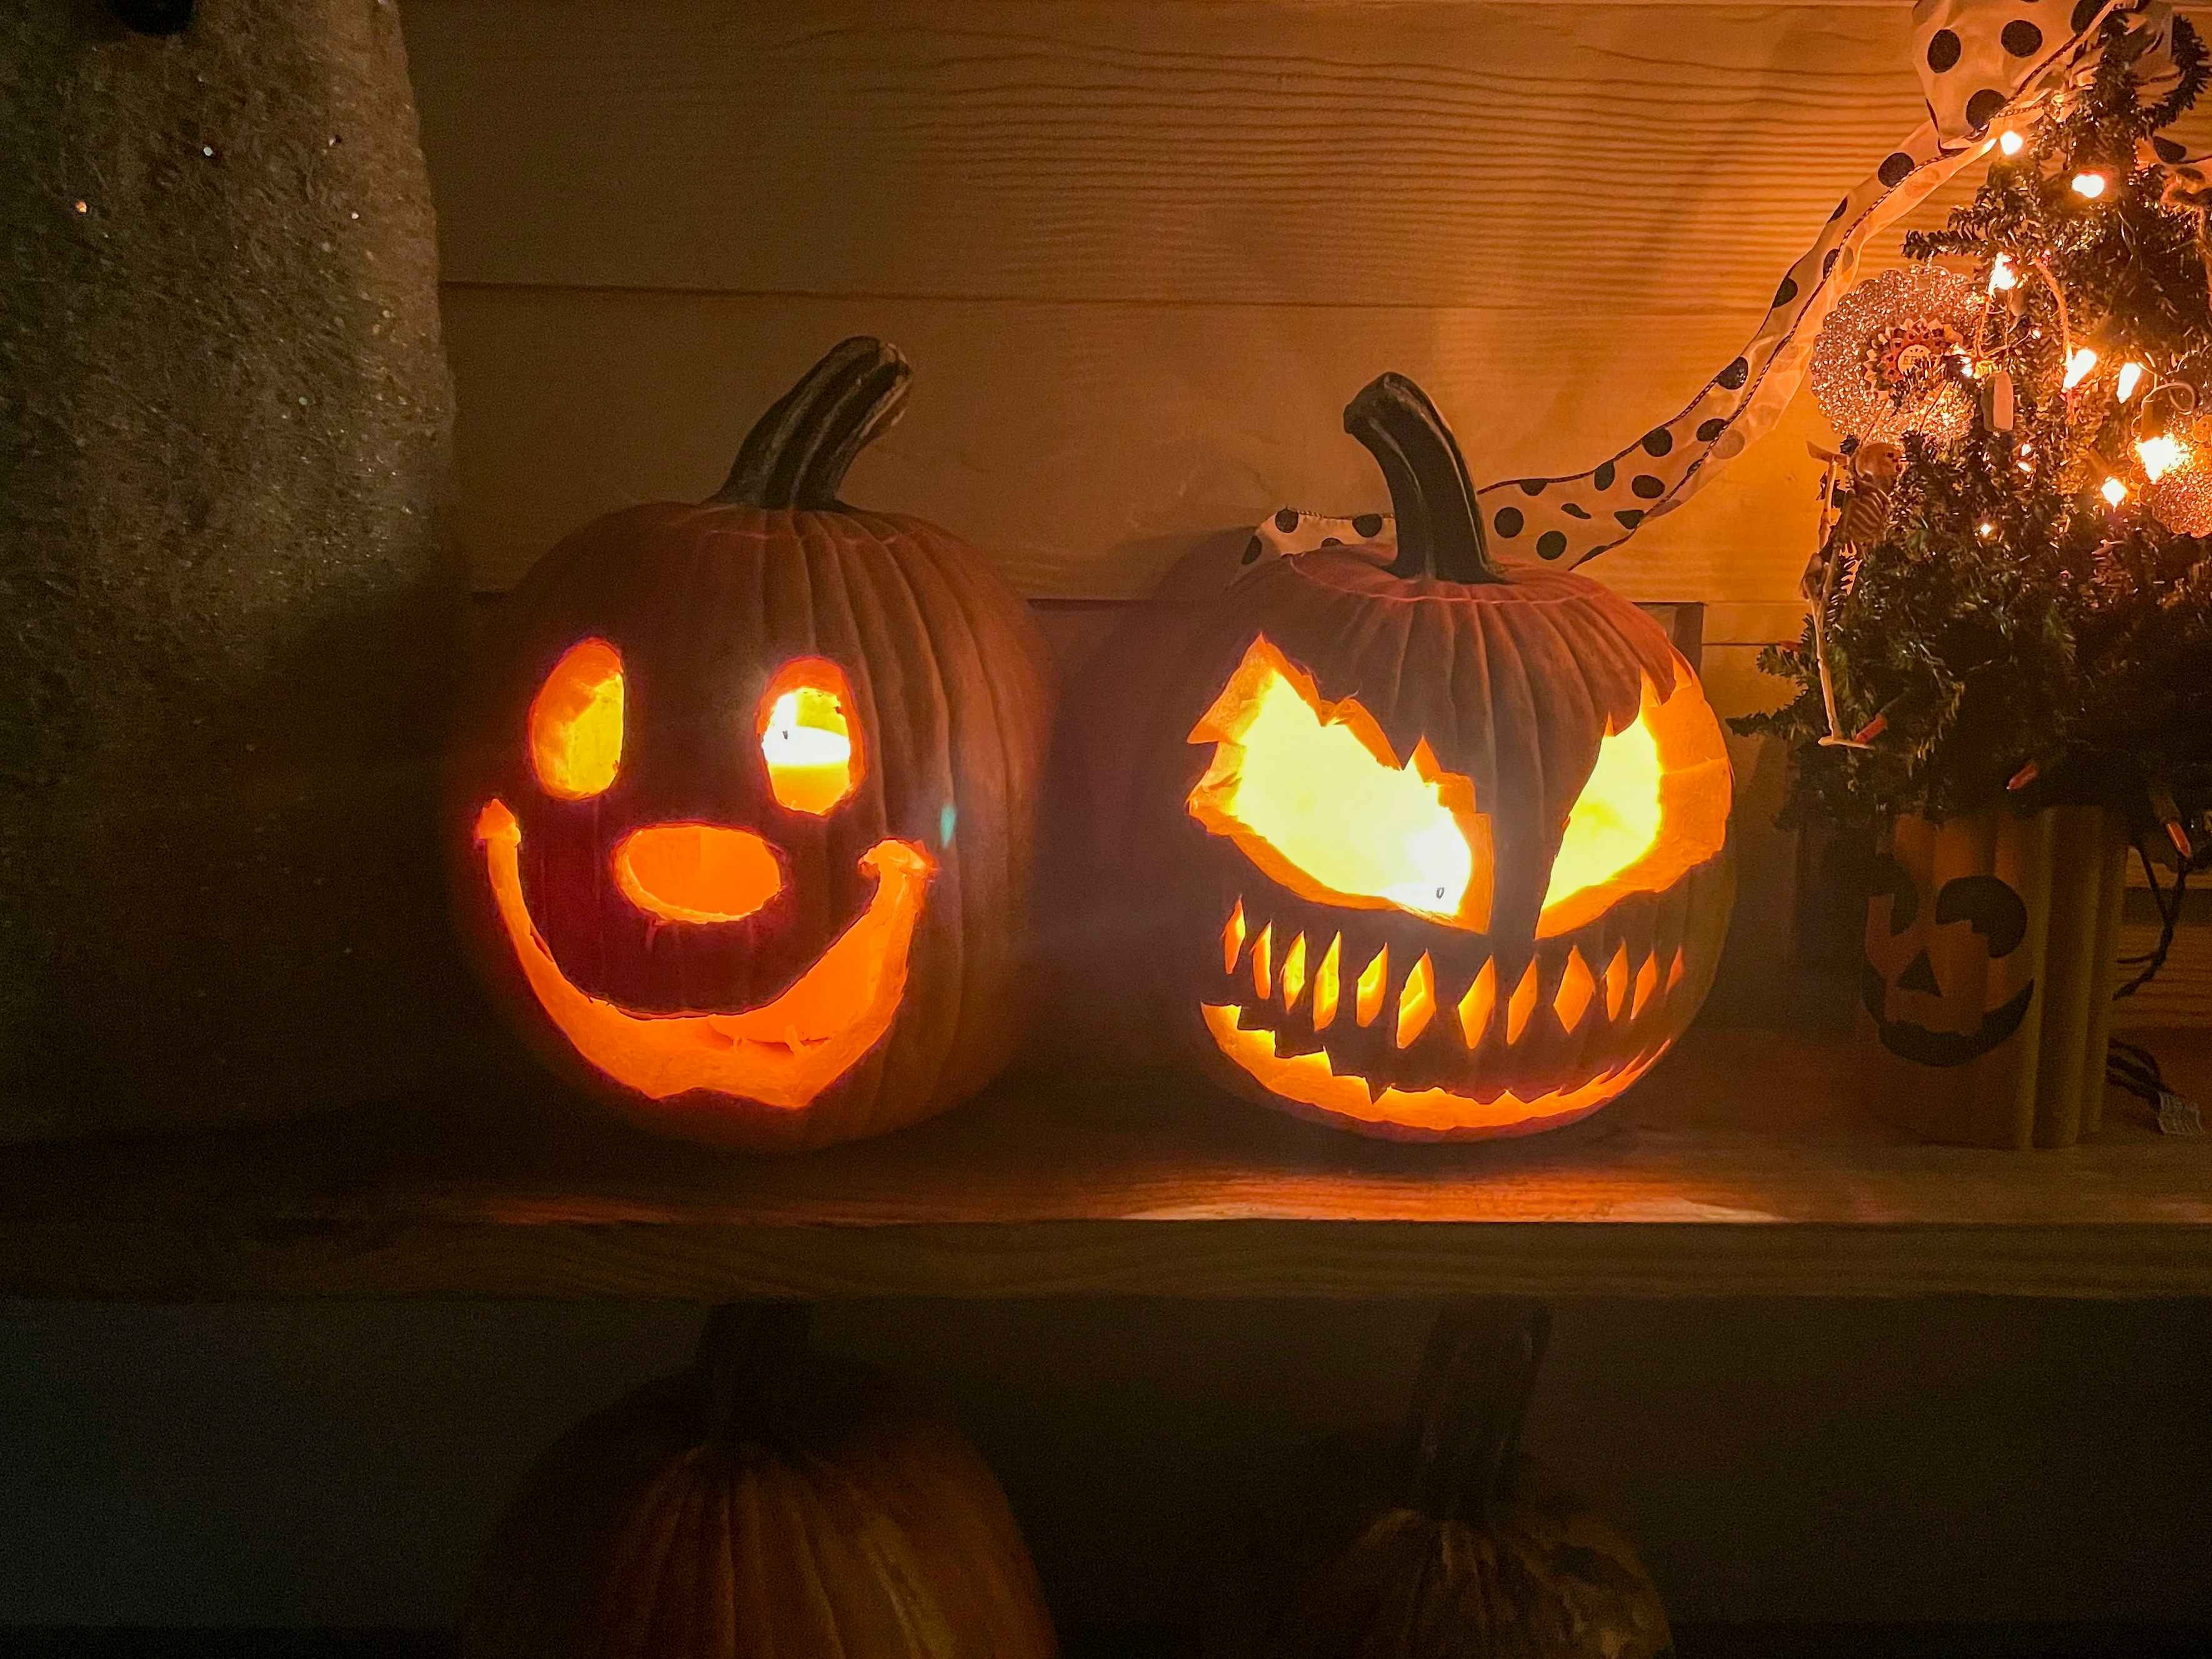 two carved pumpkins lit from inside.